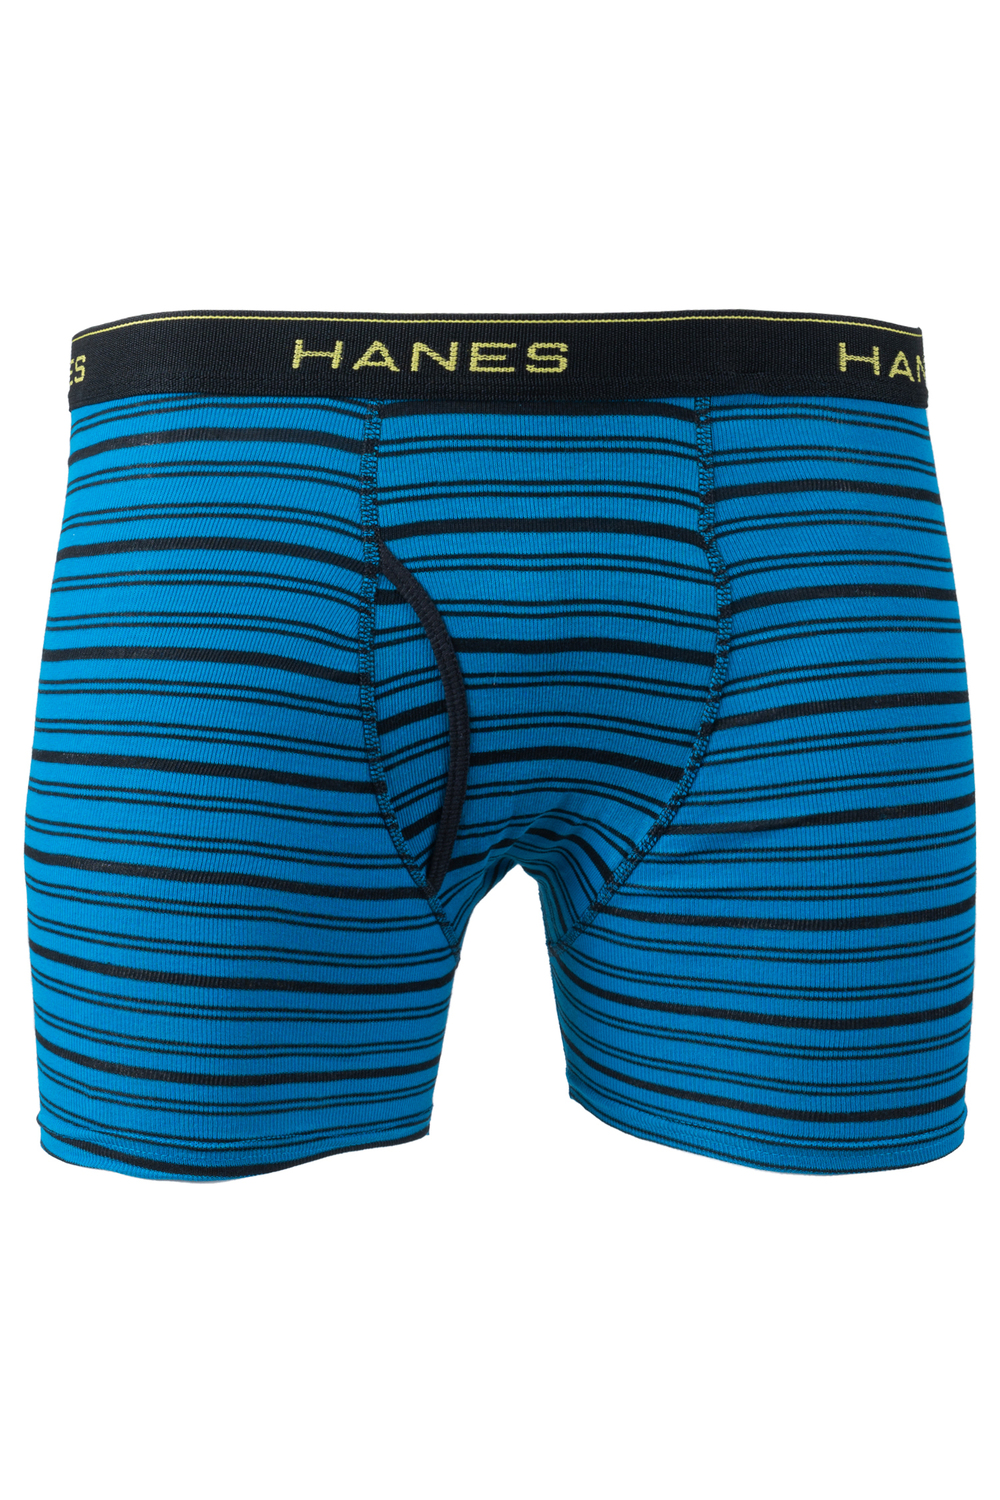 Hanes - Sport Styling, tagless boxer briefs, pk. of 3. Size: extra large